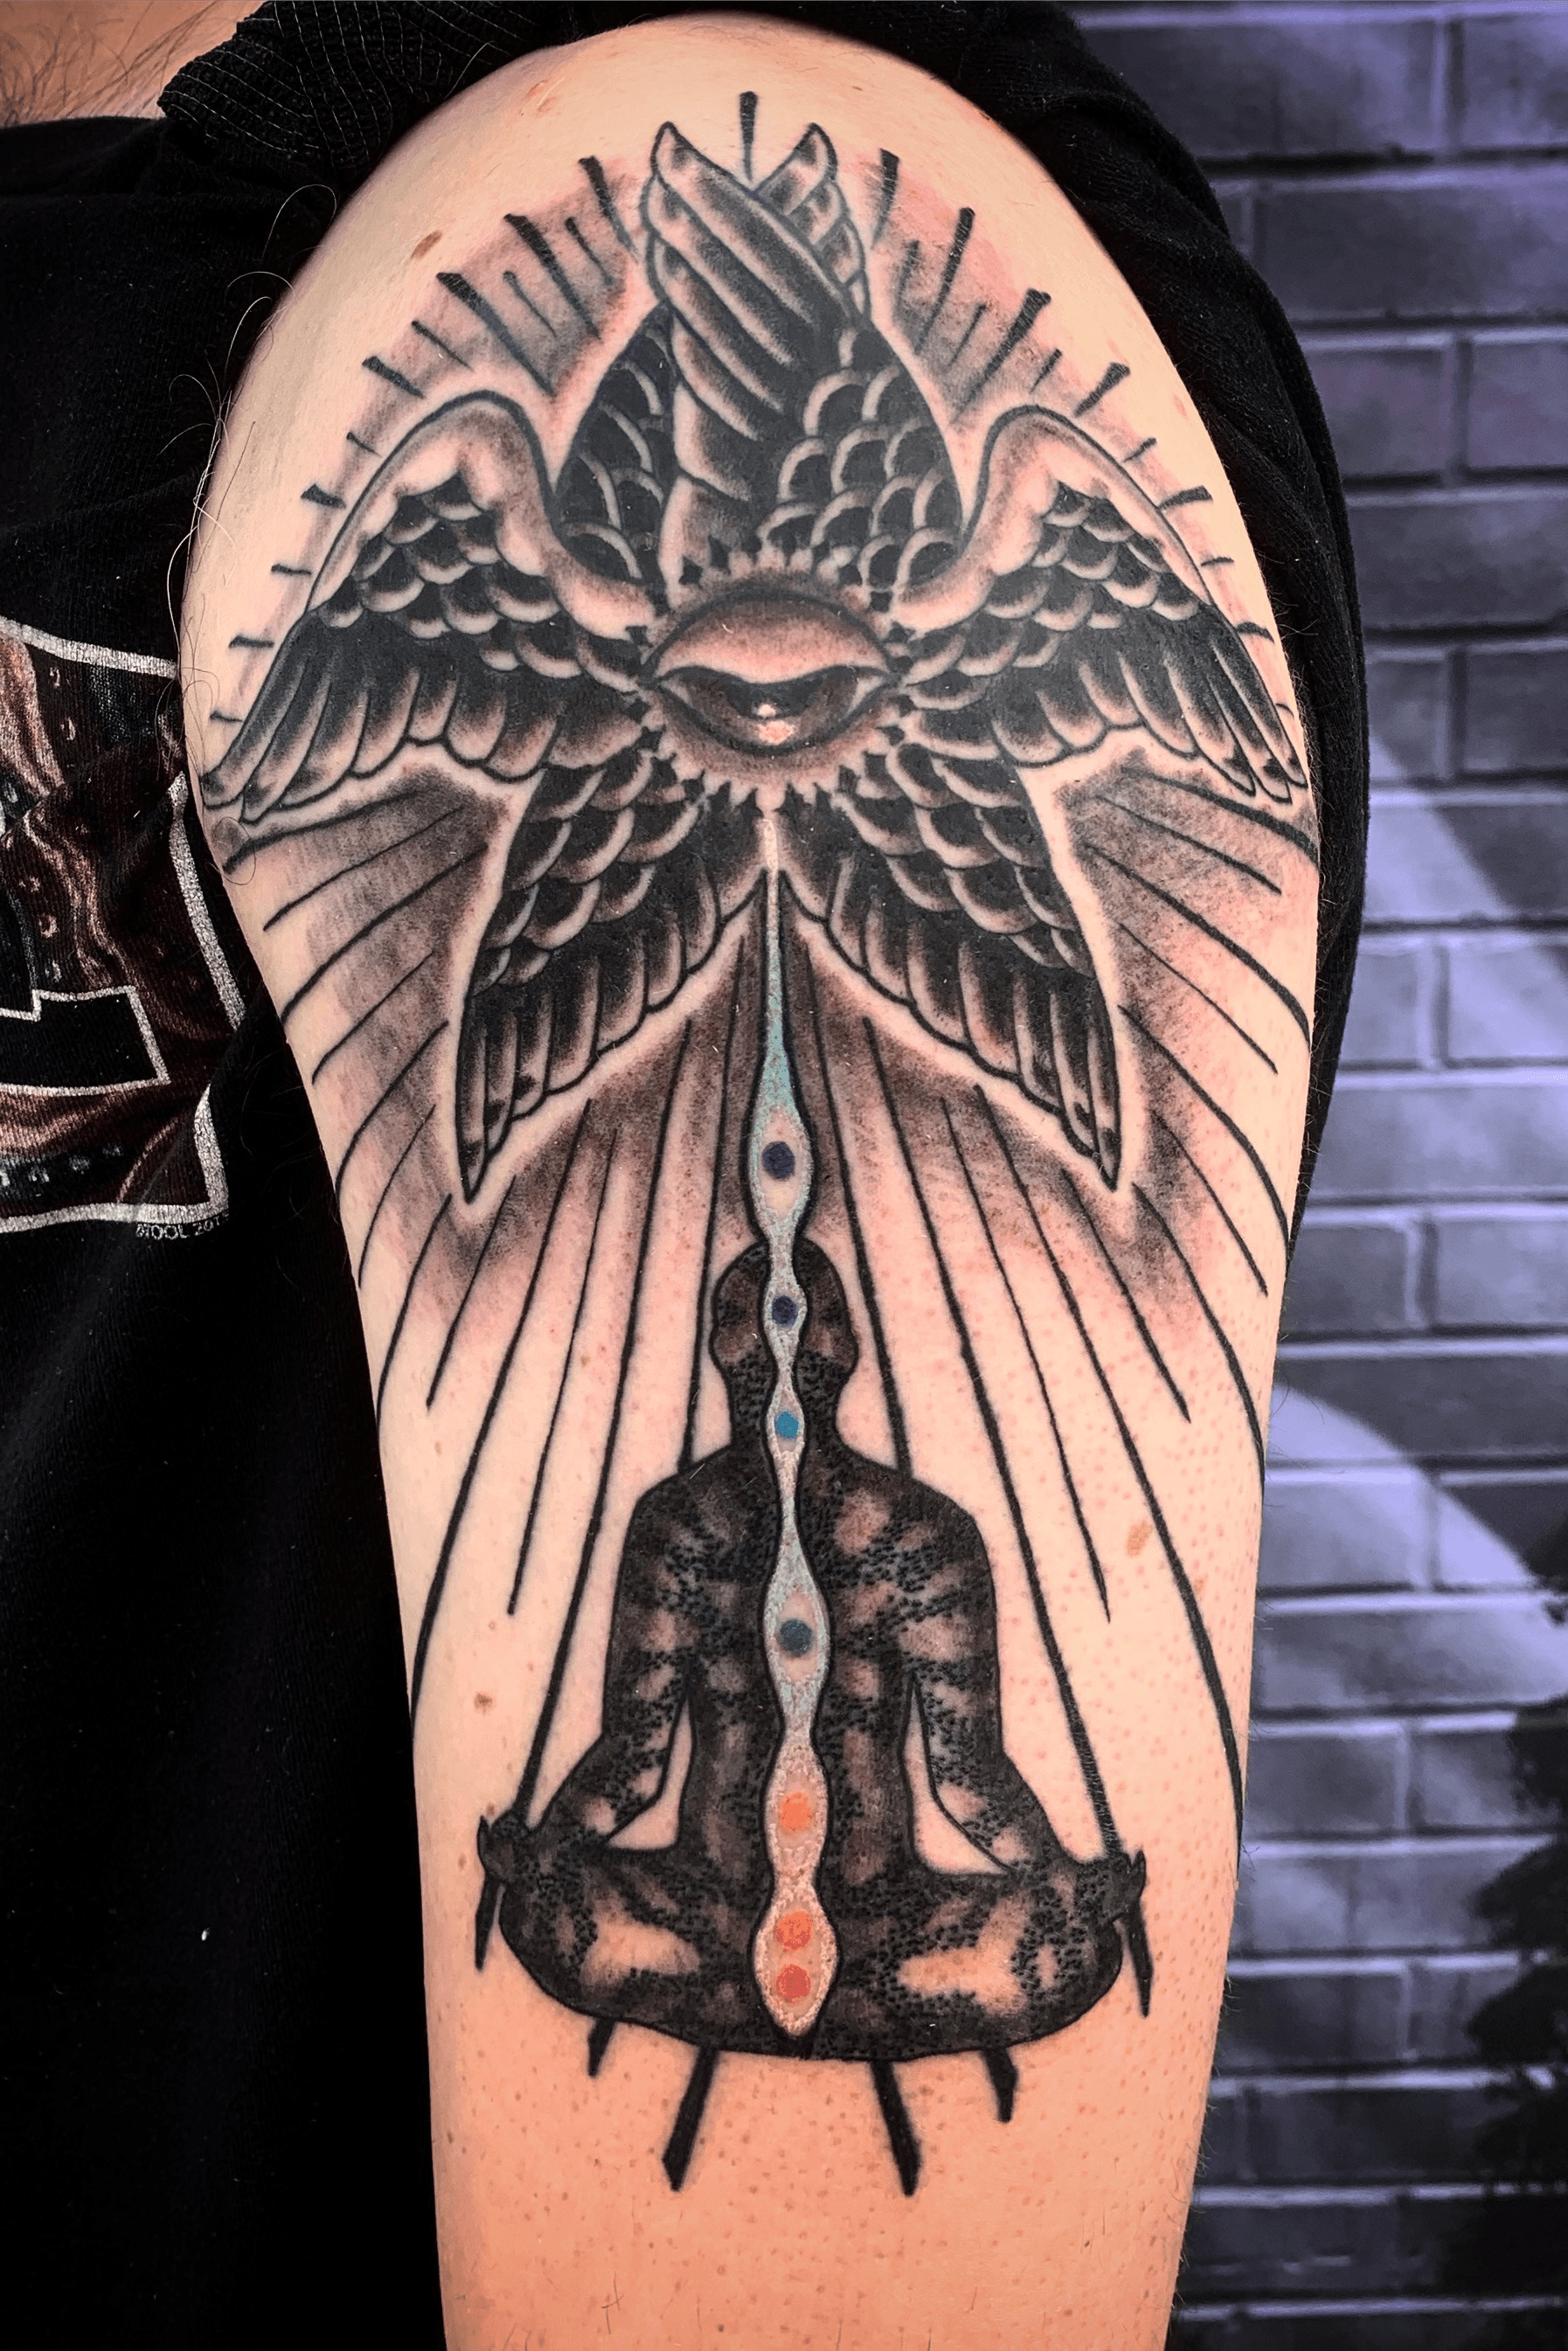 Fresh and healed Seraph for a rad customer made by me at Black Heart Tattoo  in San Francisco  rtraditionaltattoos